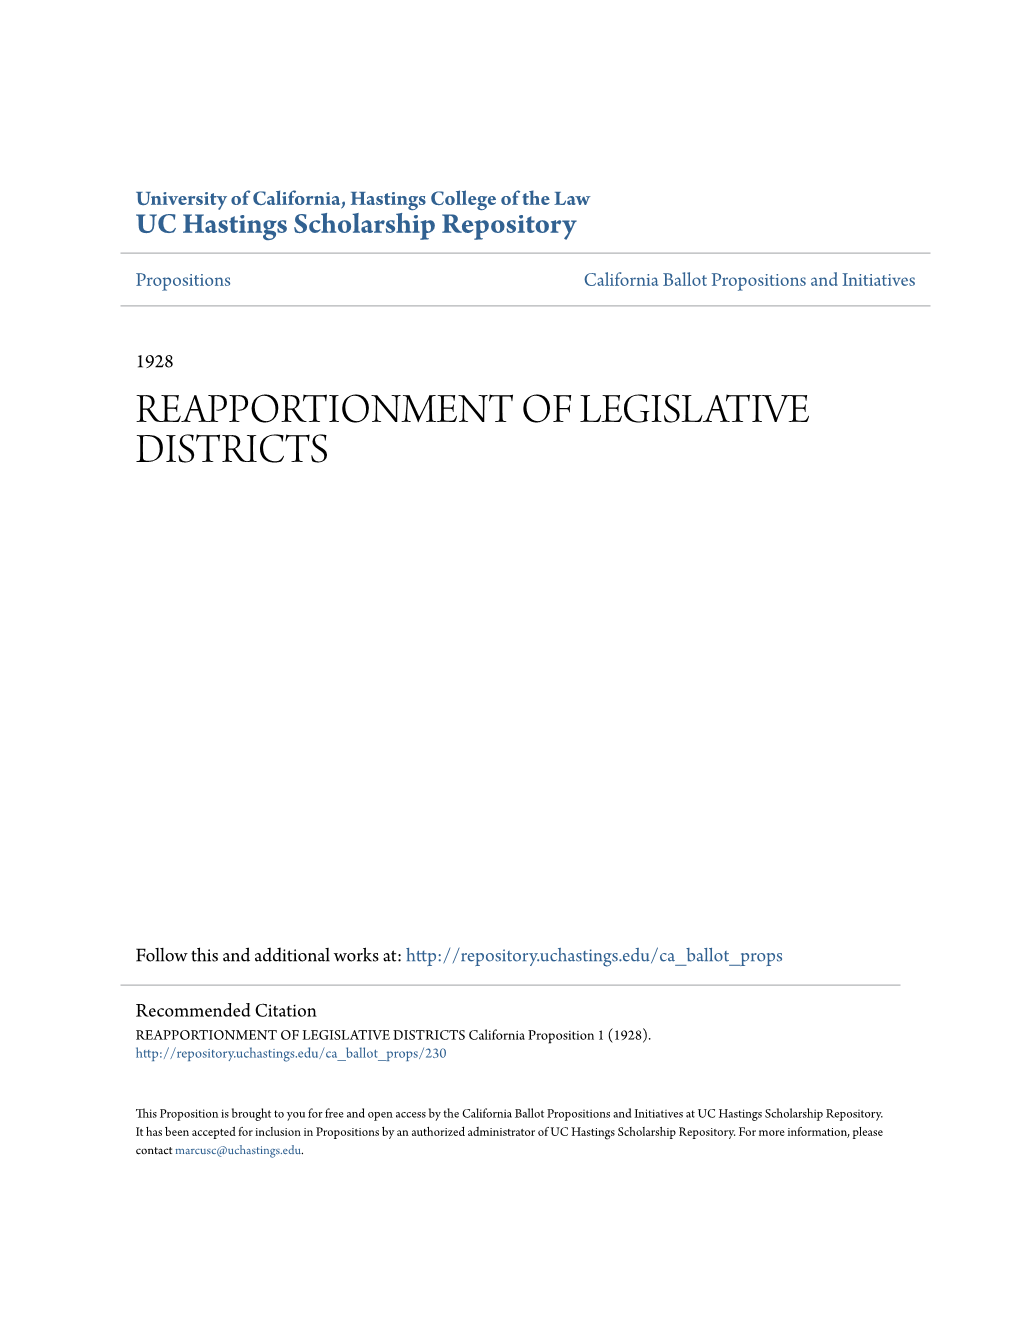 Reapportionment of Legislative Districts